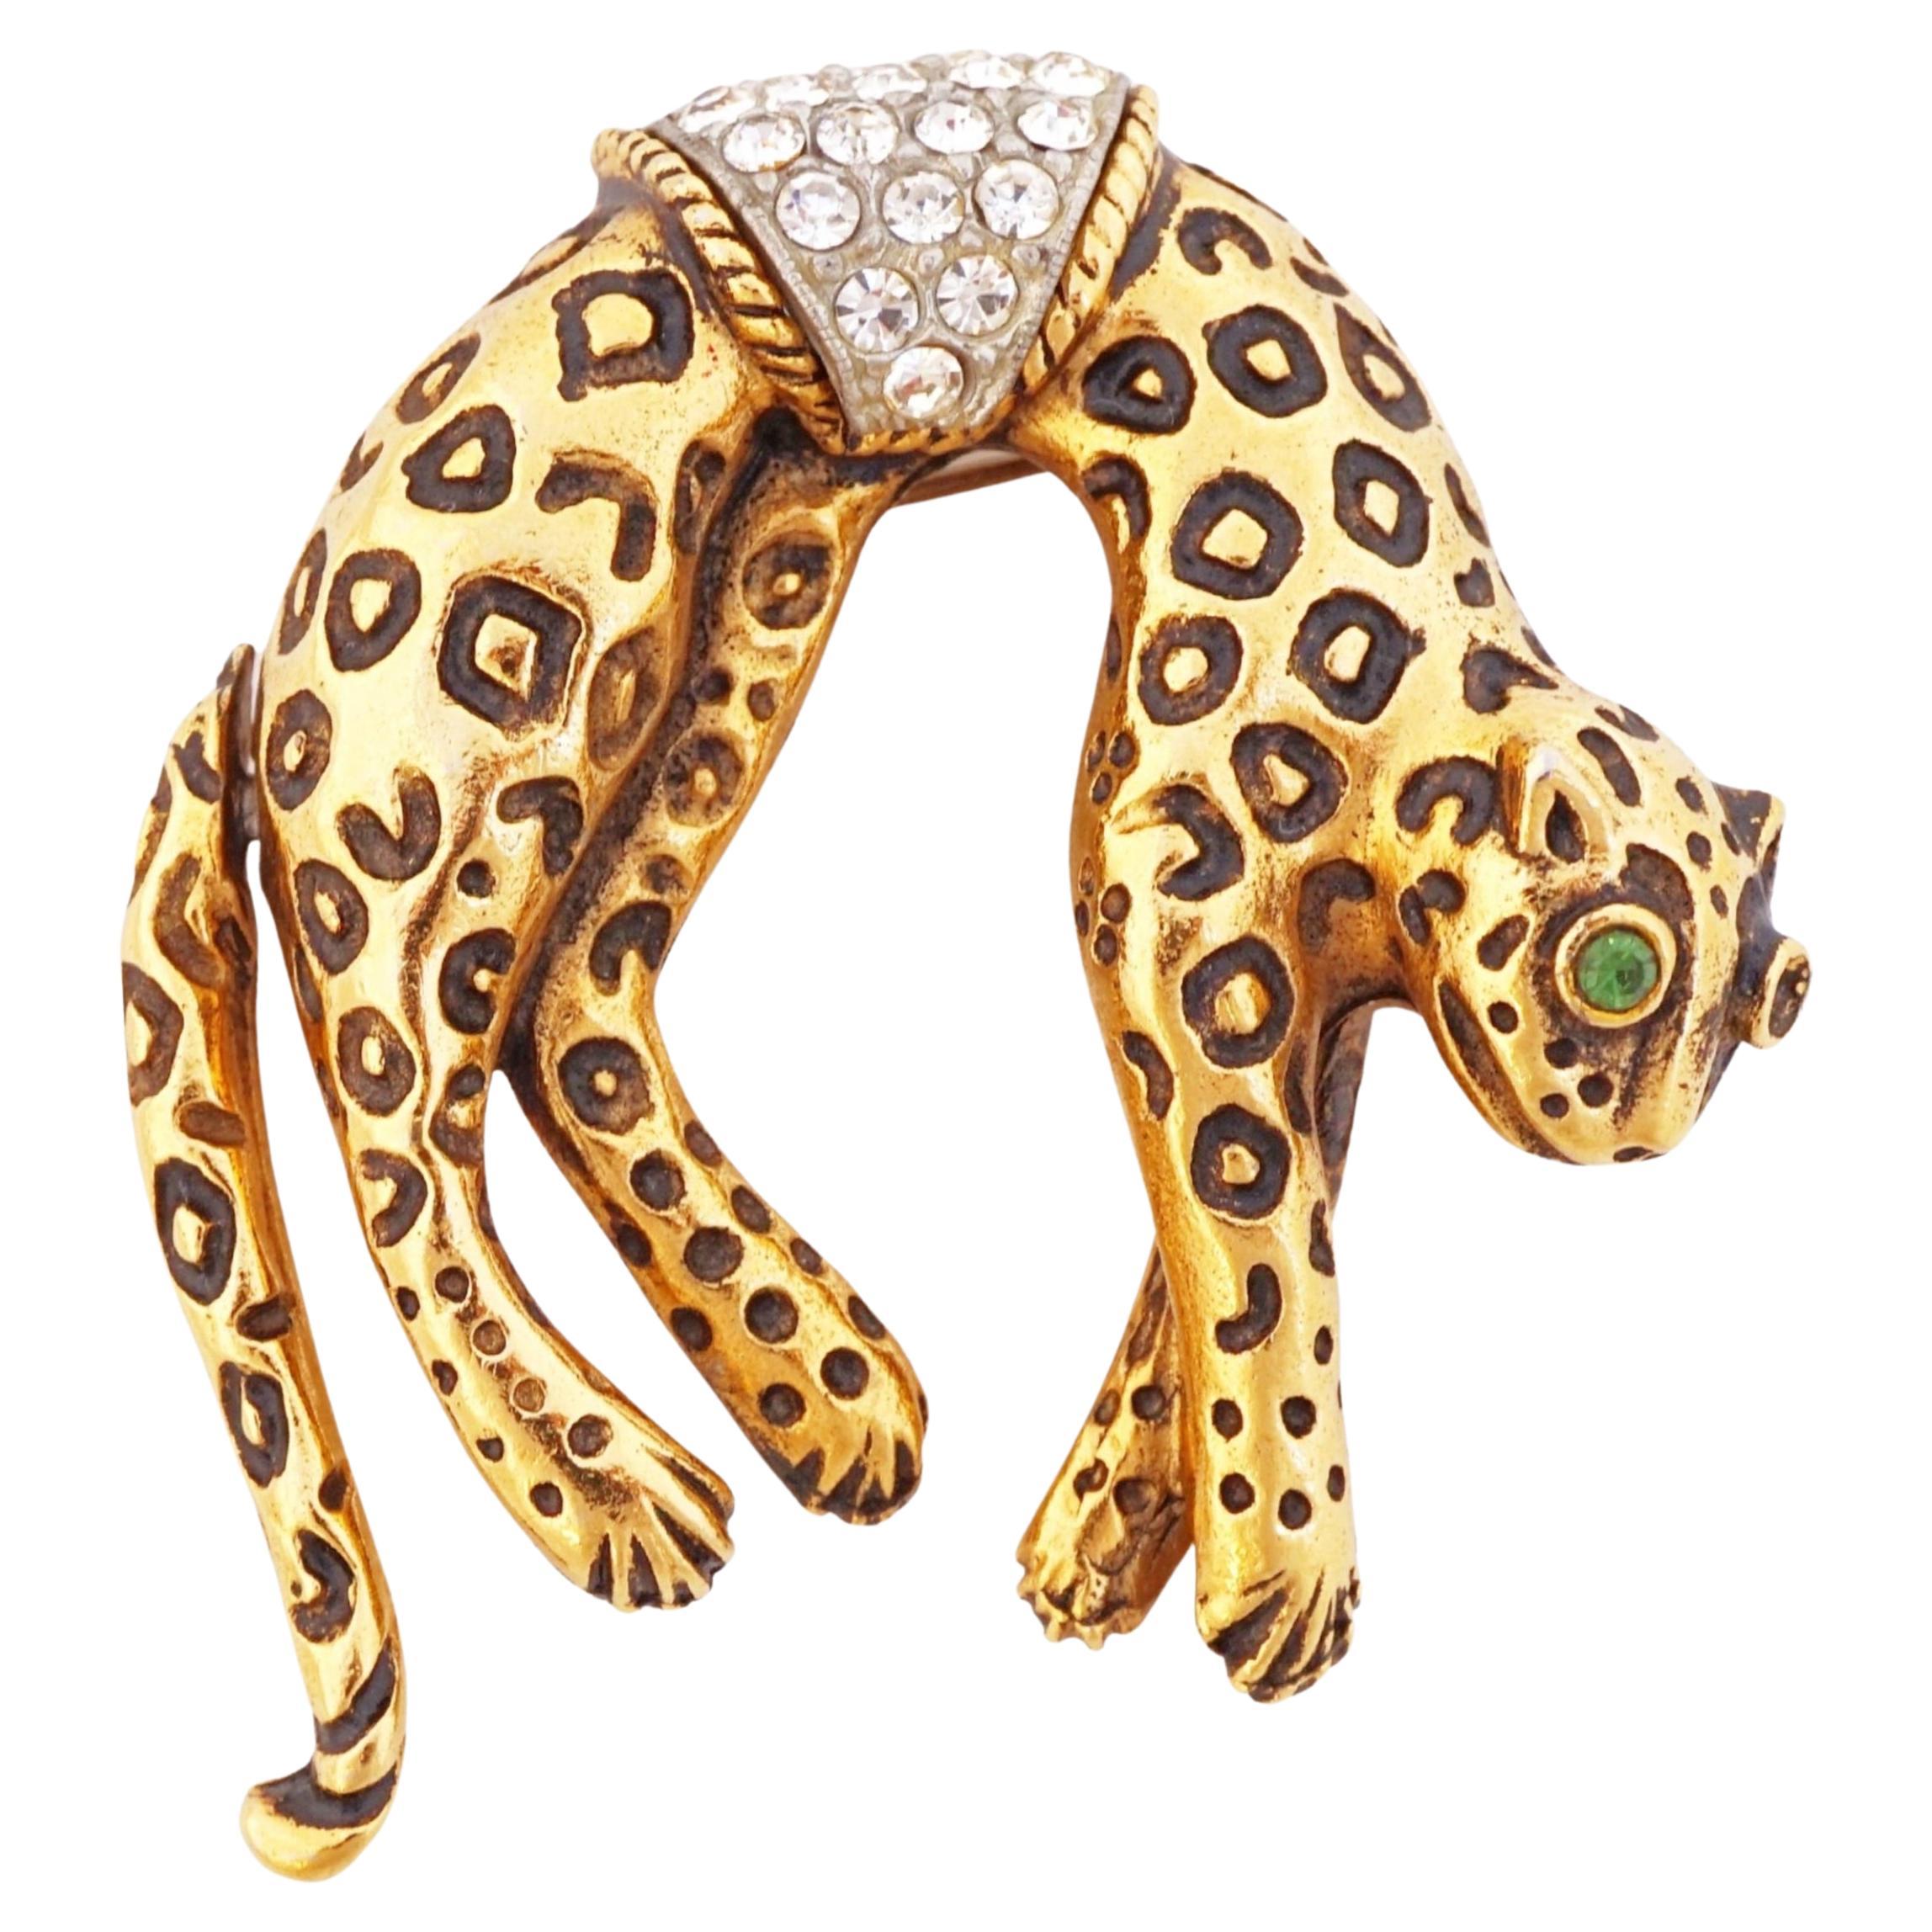 Gilded Spotted Panther Figural Brooch By Florenza, 1970s For Sale